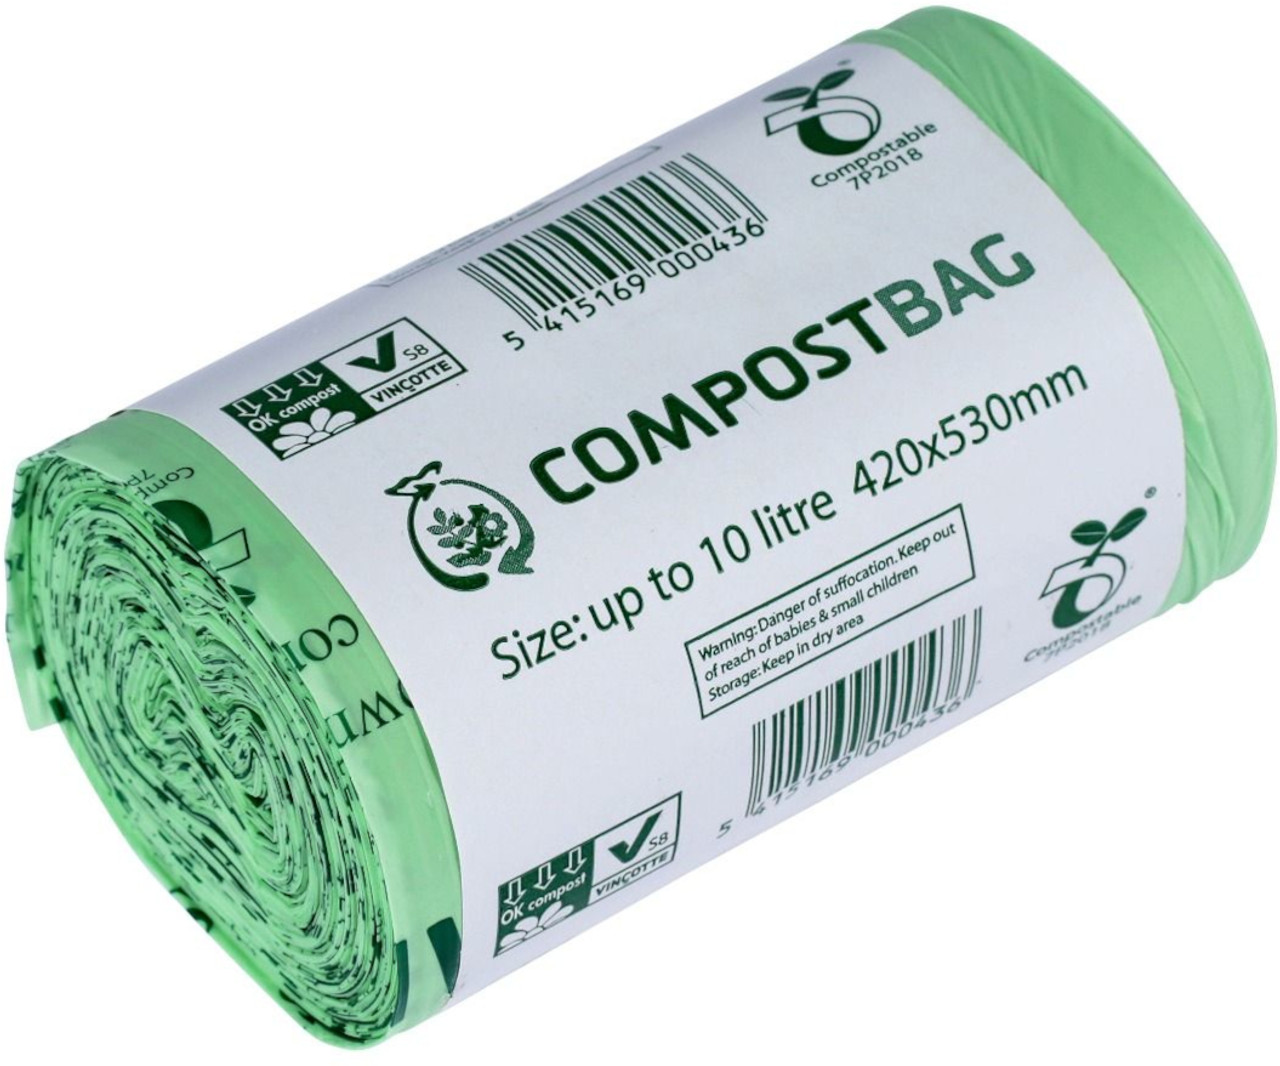 All-Green Compost Bag Tie-Top Compostable Kitchen Caddy Bags - 10 Ltr - CB10TH